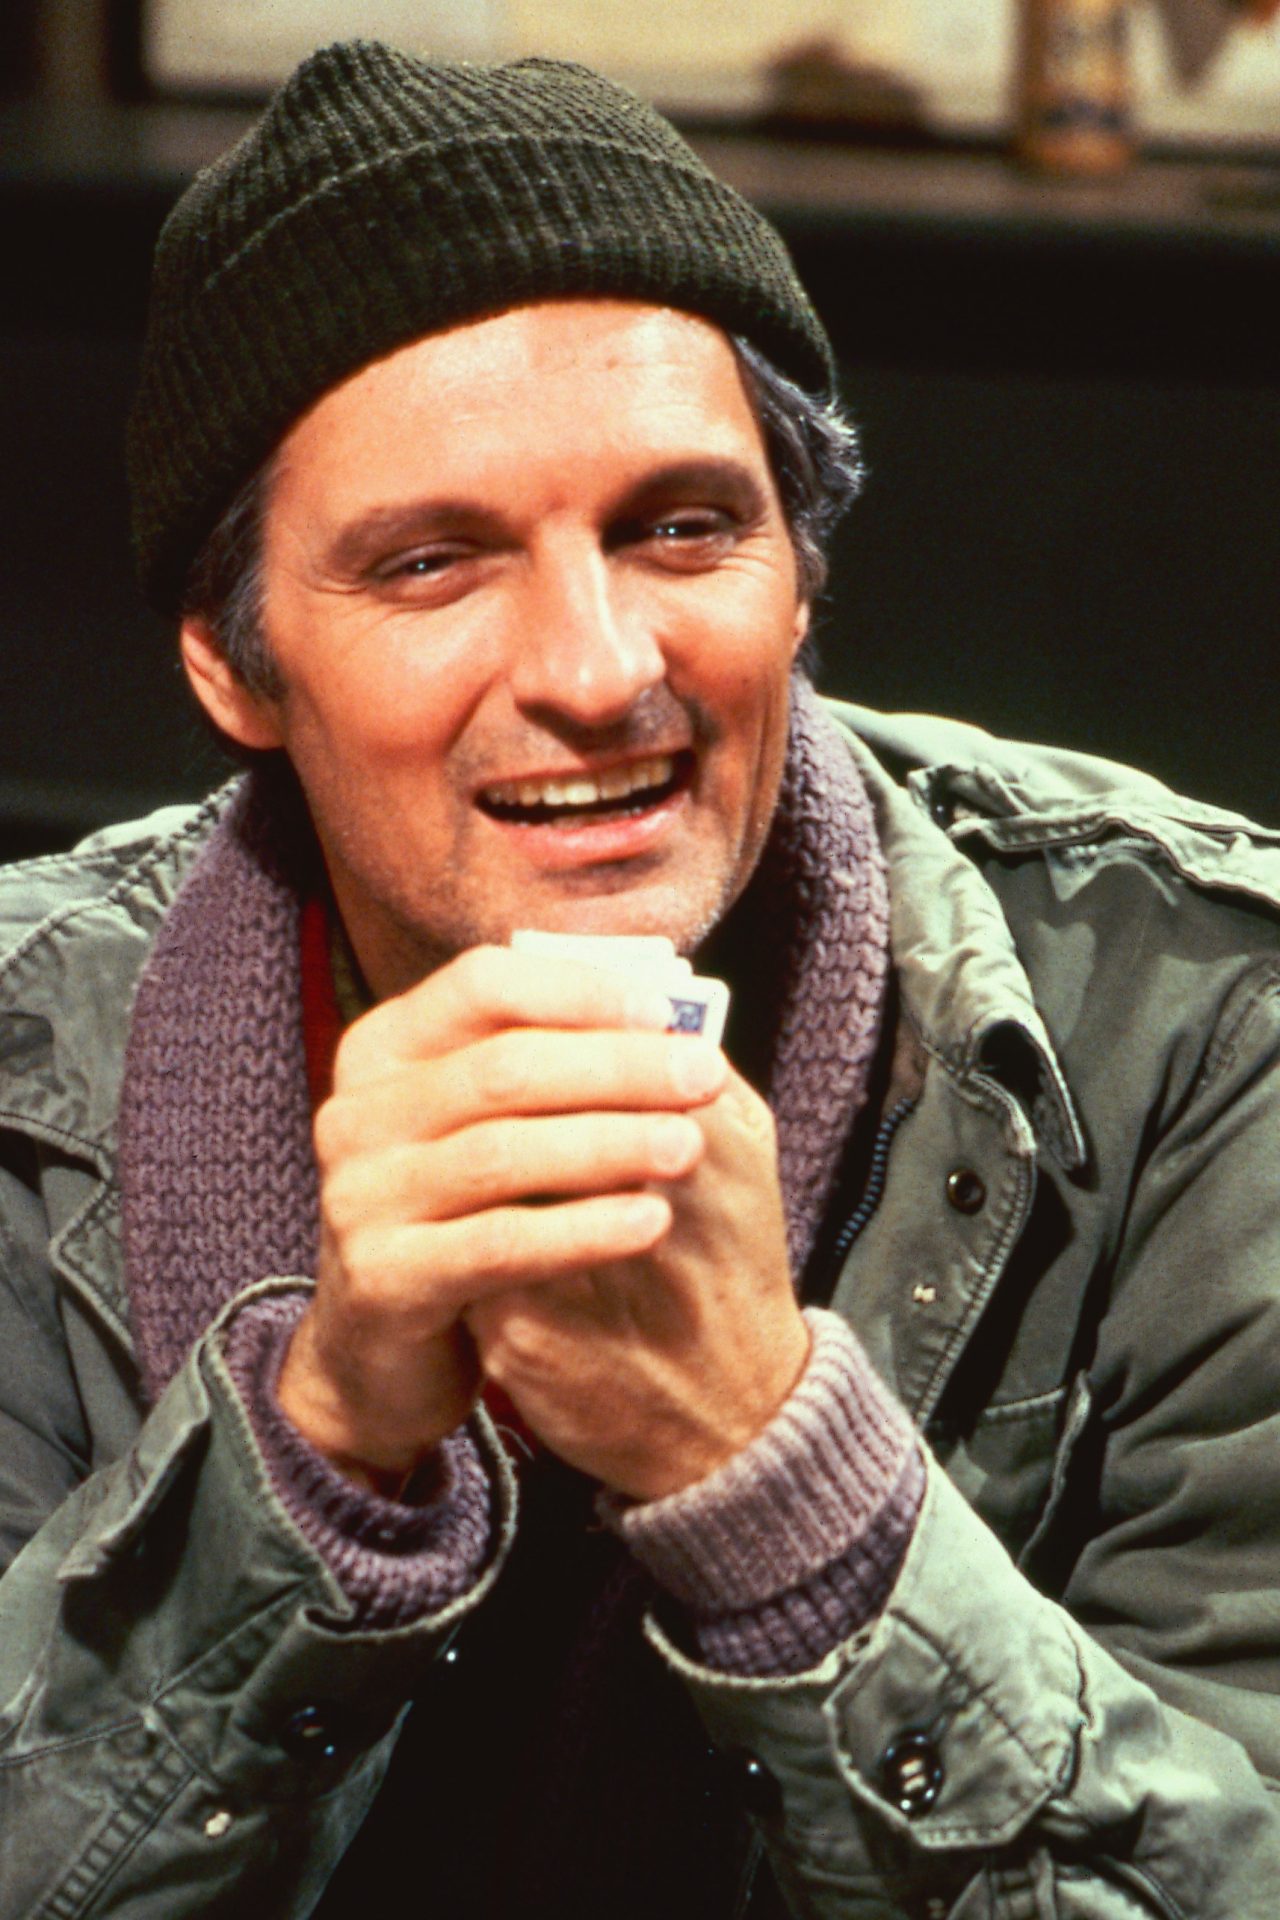 Alan Alda is best known for his role as 'Hawkeye' on M*A*S*H